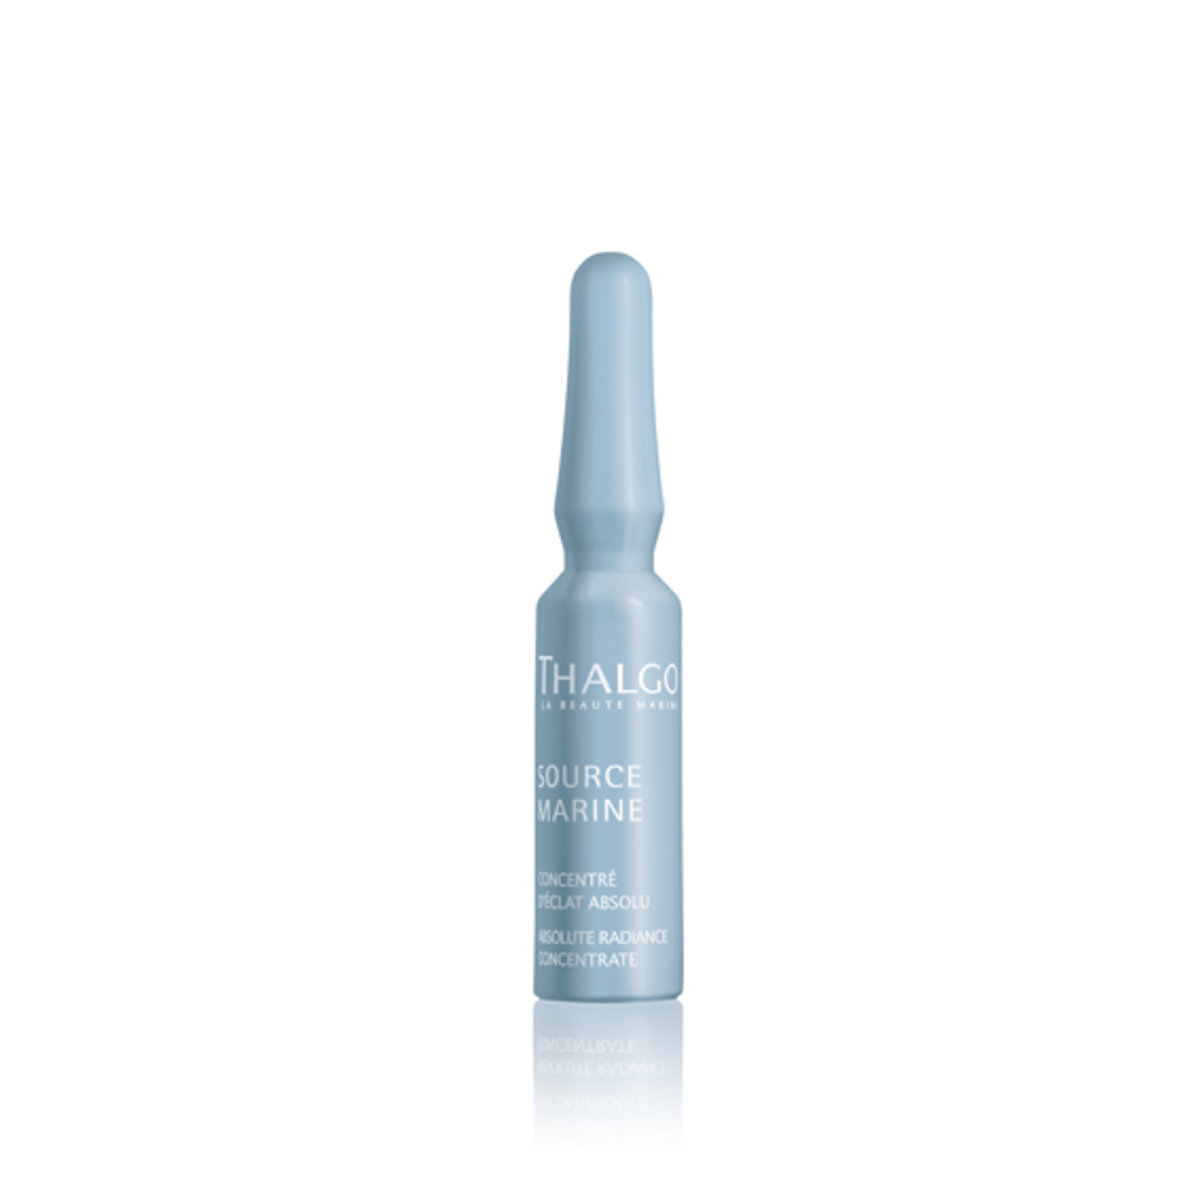 Absolute Radiance Concentrate